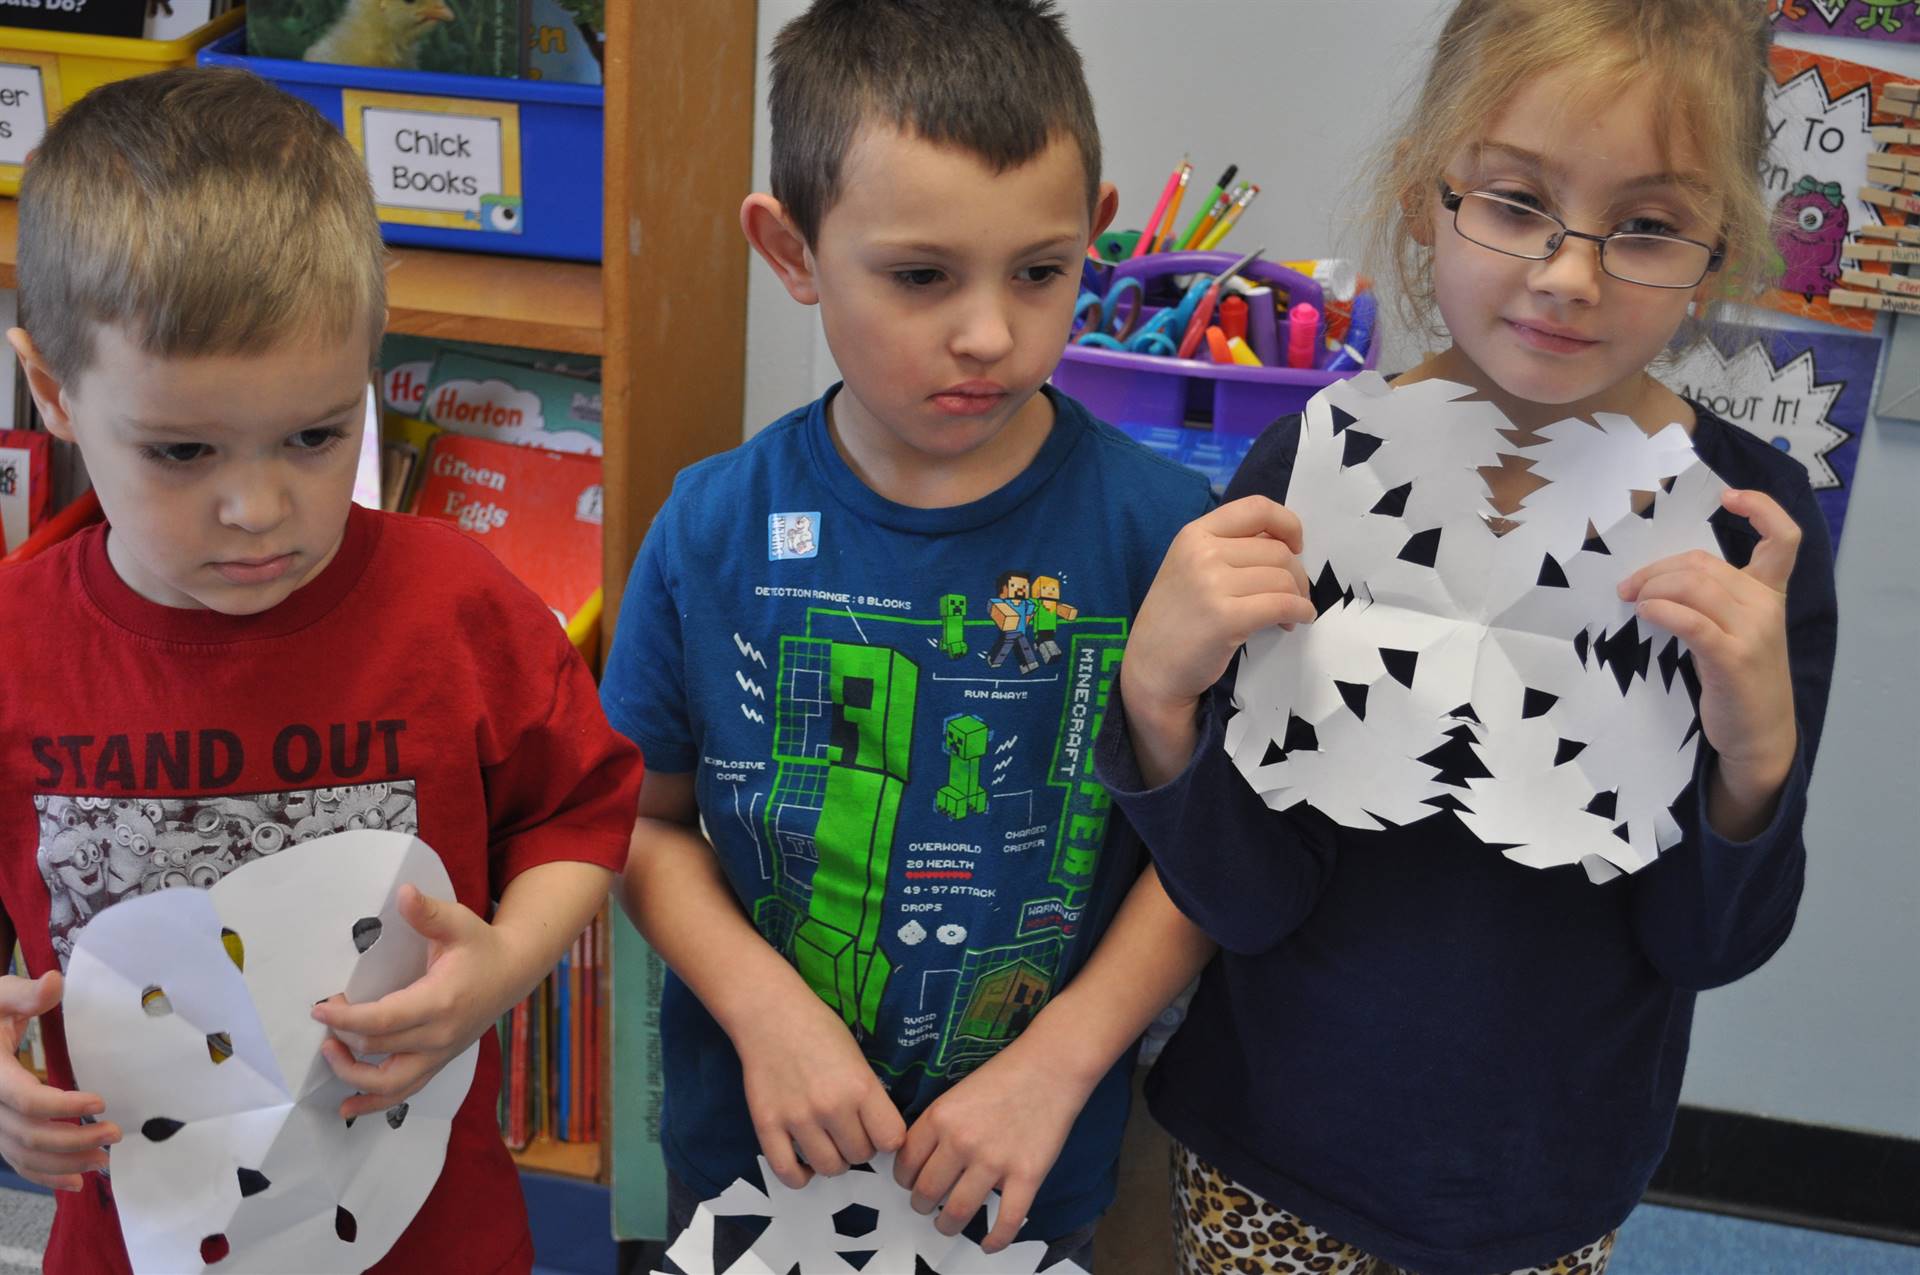 3 students show snowflakes.